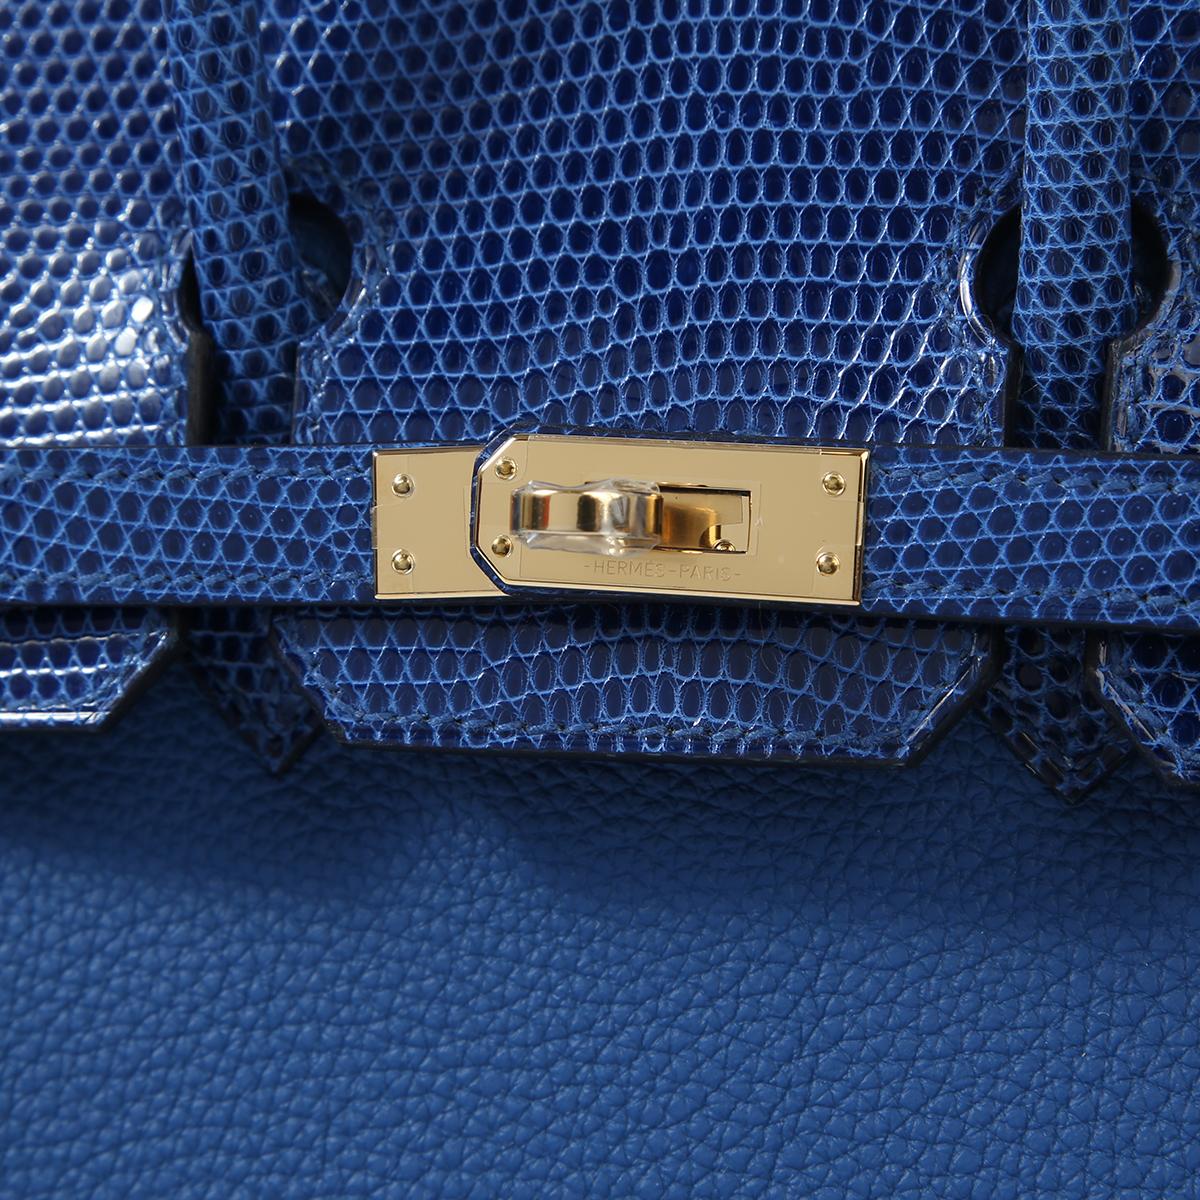 New Condition
From 2022 Collection
Bleu Royal 
Lizard
Togo
Permabrass Hardware
Includes  Padlock, Clochette, Rain Cover, Dustbag, Box, Keys
Measures 9.85